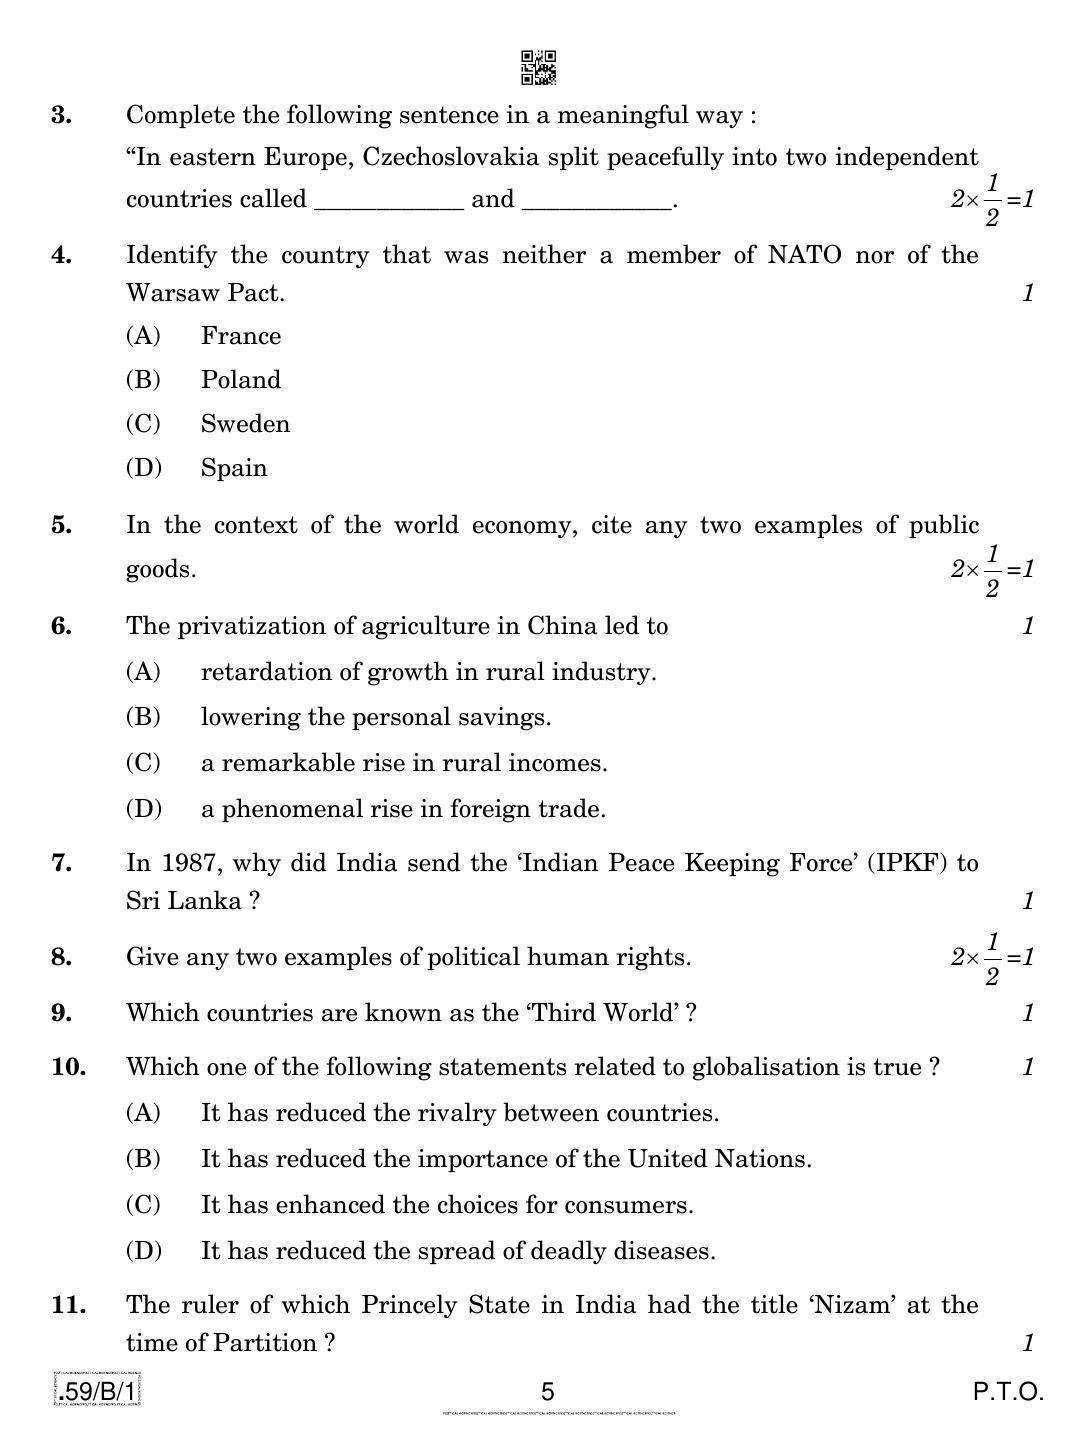 CBSE Class 12 59-C-1 - Political Science 2020 Compartment Question Paper - Page 5